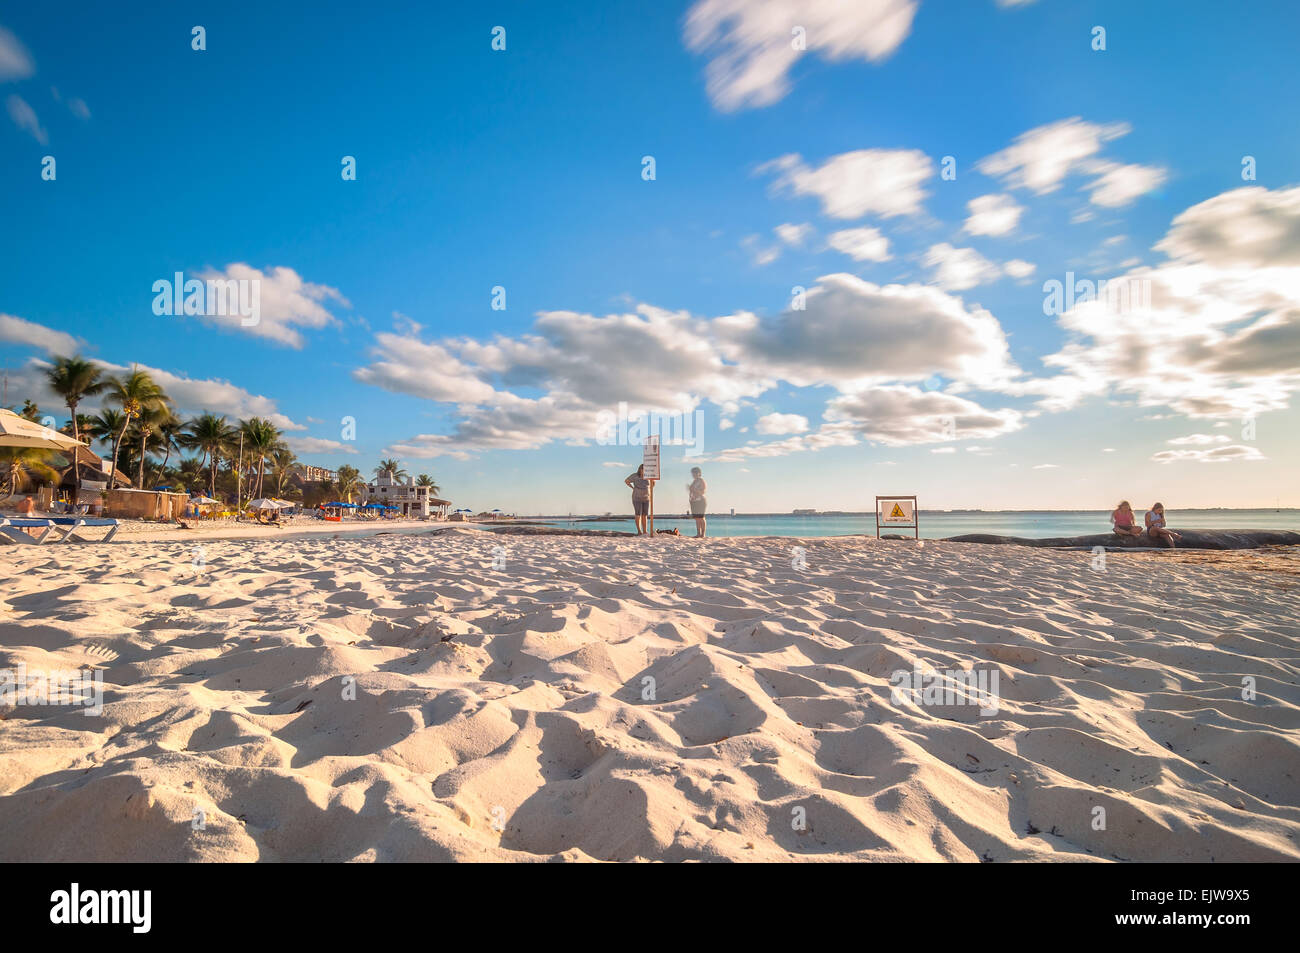 Isla Mujeres, Mexico - April 21, 2014: long exposure of tourists enjoying sunset on famous Playa del Norte beach in Isla Mujeres Stock Photo